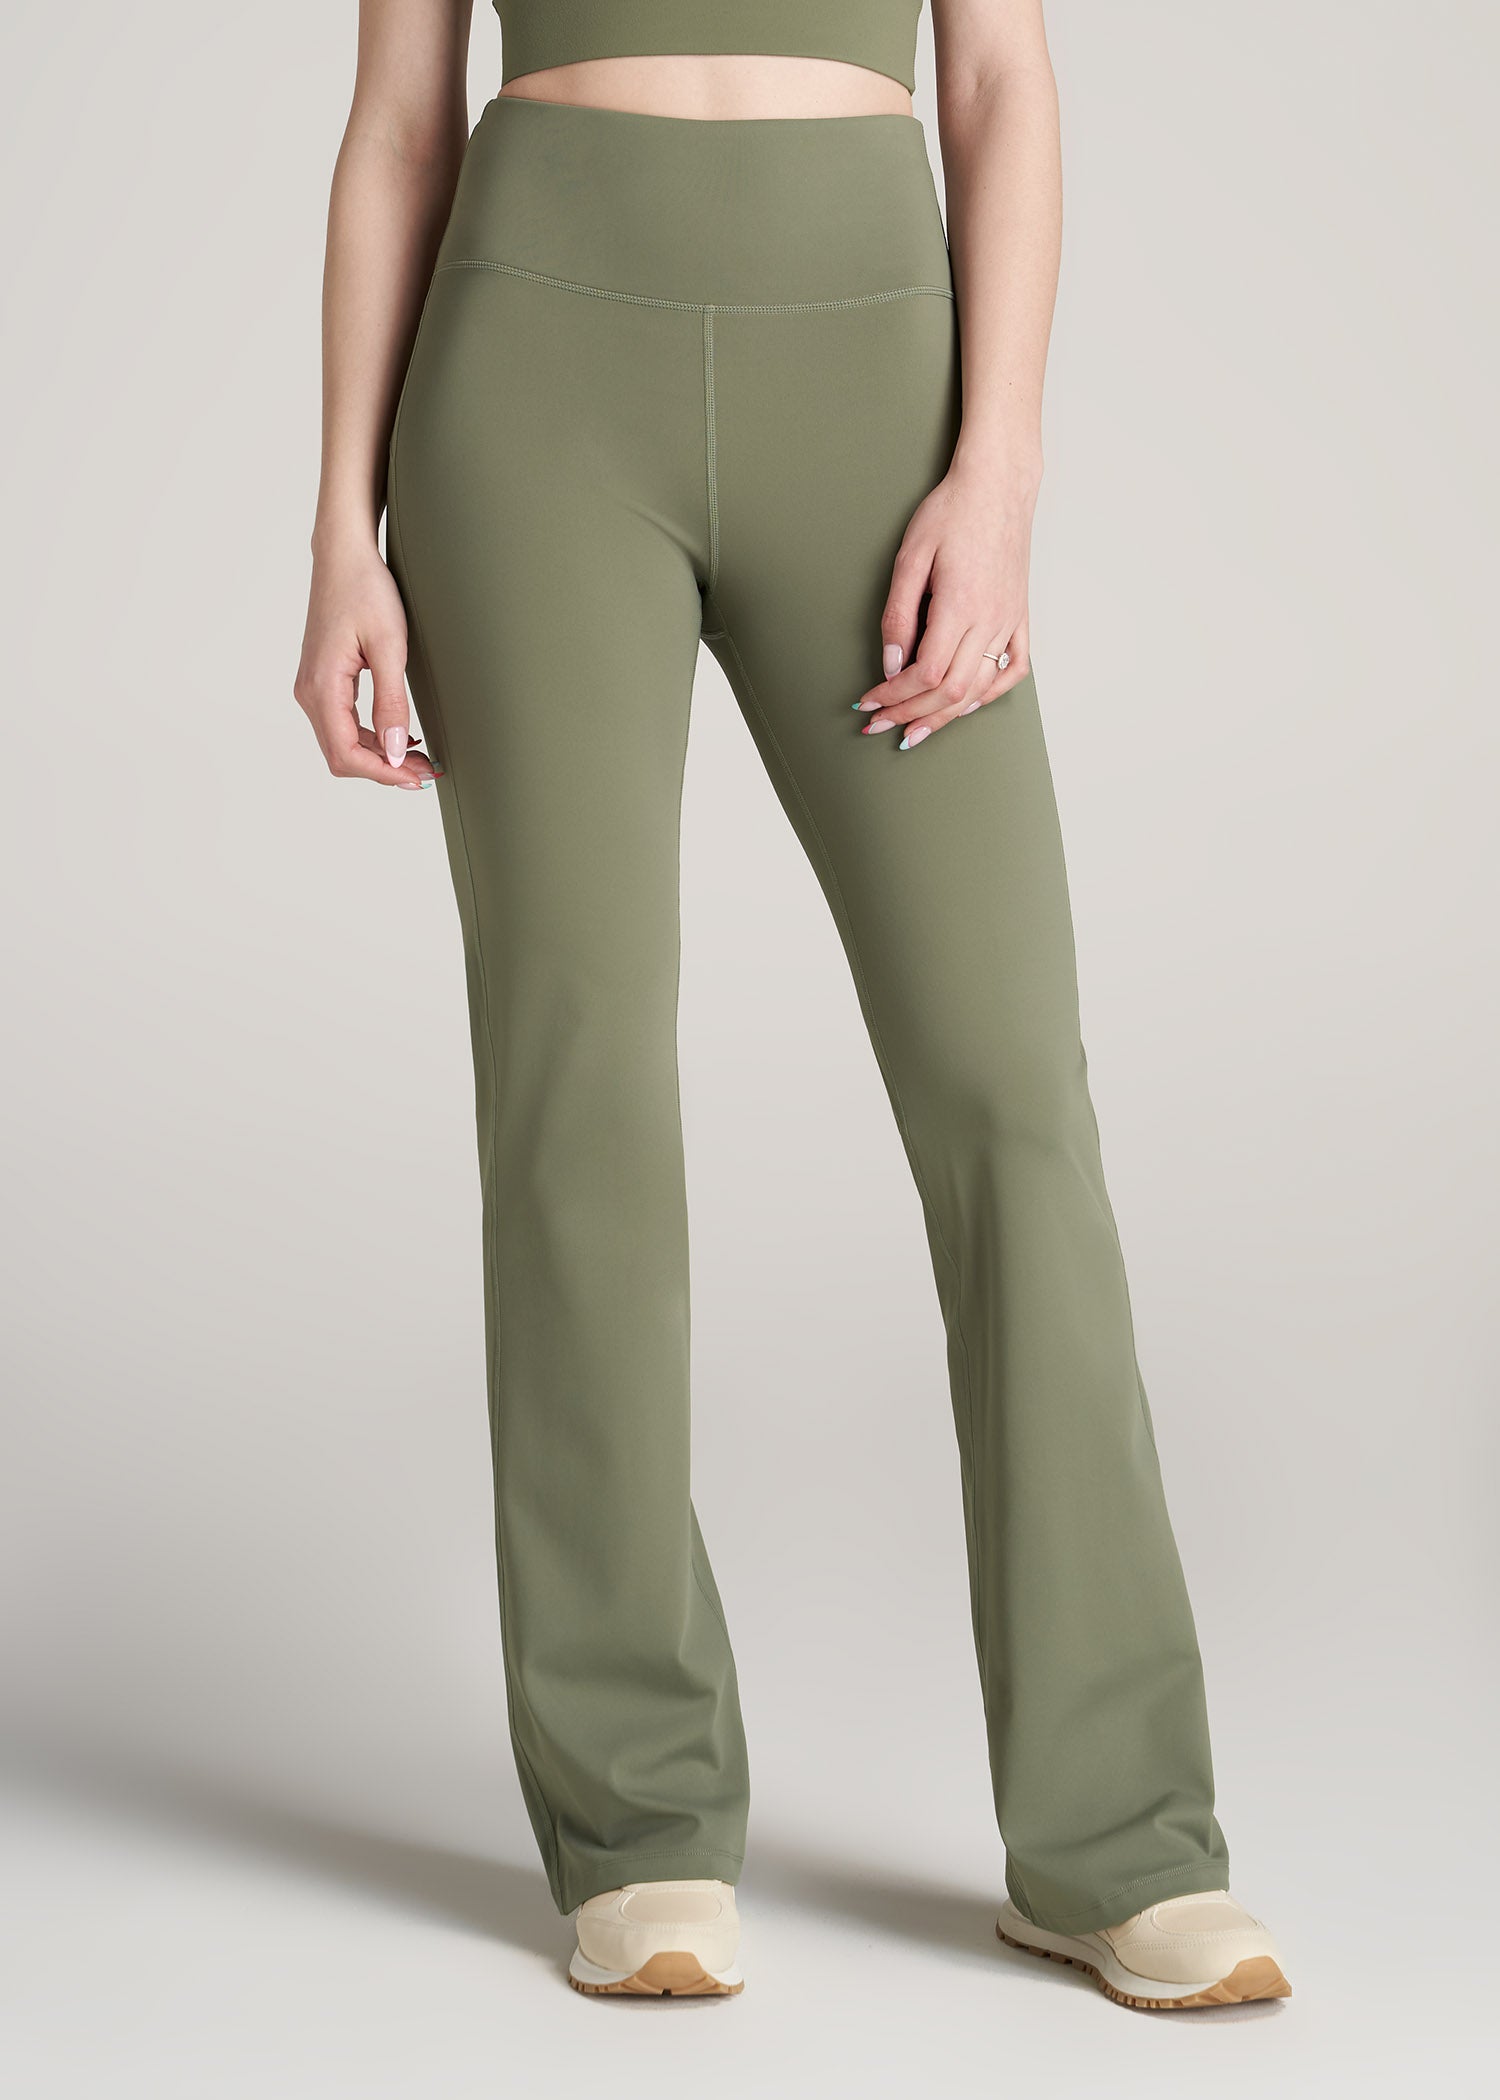       American-Tall-Women-Balance-OpenBottom-Yoga-Pant-Olive-front